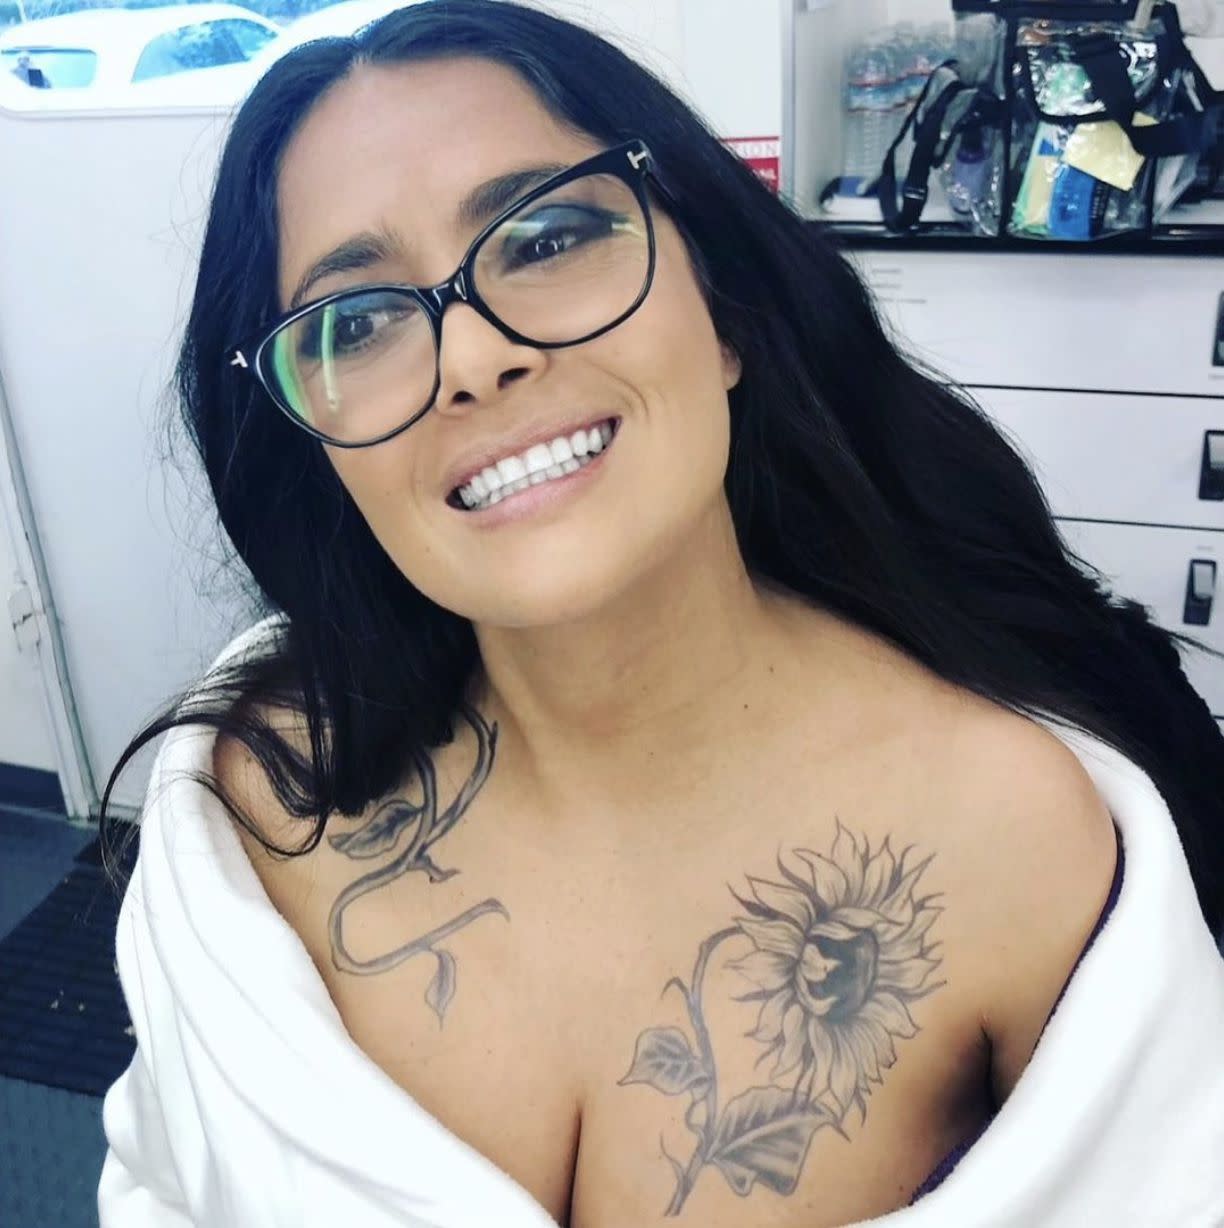 Salma Hayek is all smiles while sitting in the hair and makeup chair while on set of "Bliss." "in the middle of a #makeup #hair and #tattoo test for “Bliss”. Coming out tomorrow on @amazonprimevideo world wide"